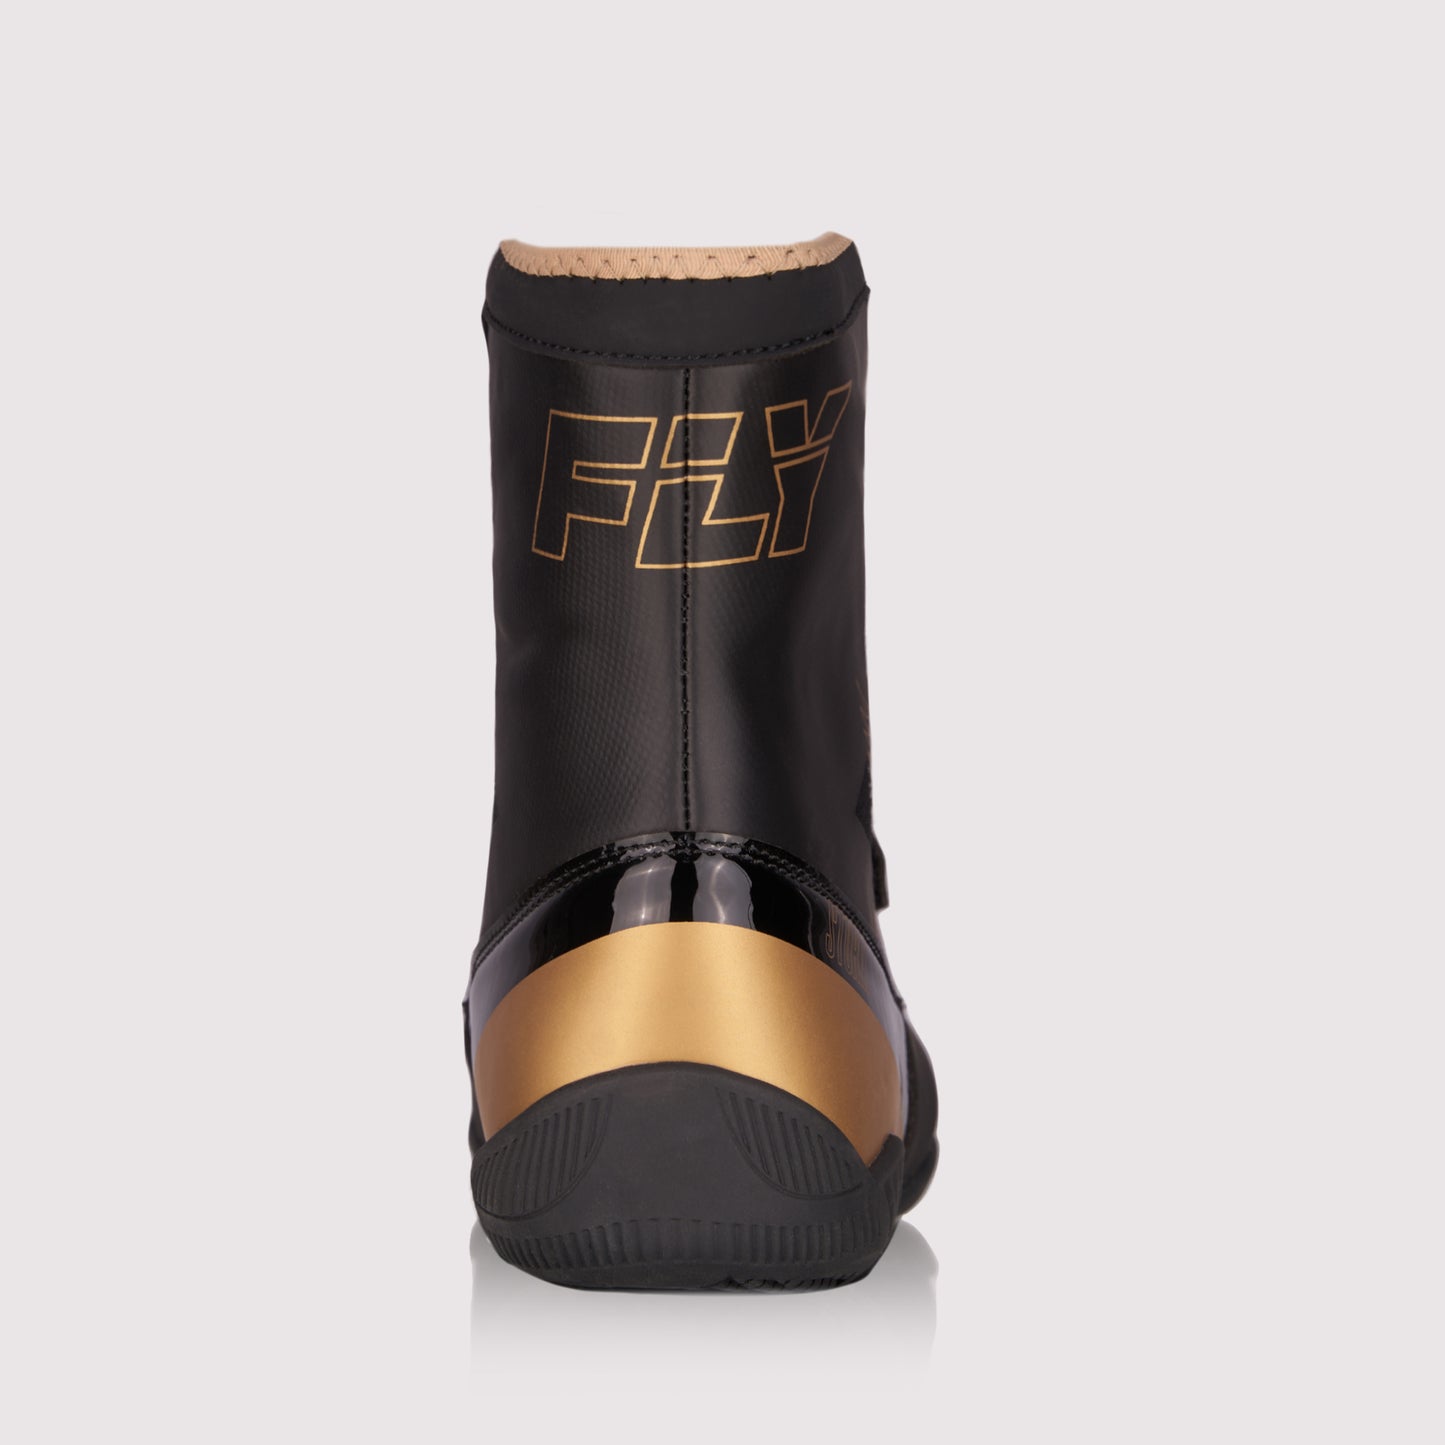 Boots black Gold Adult (8269663240436)